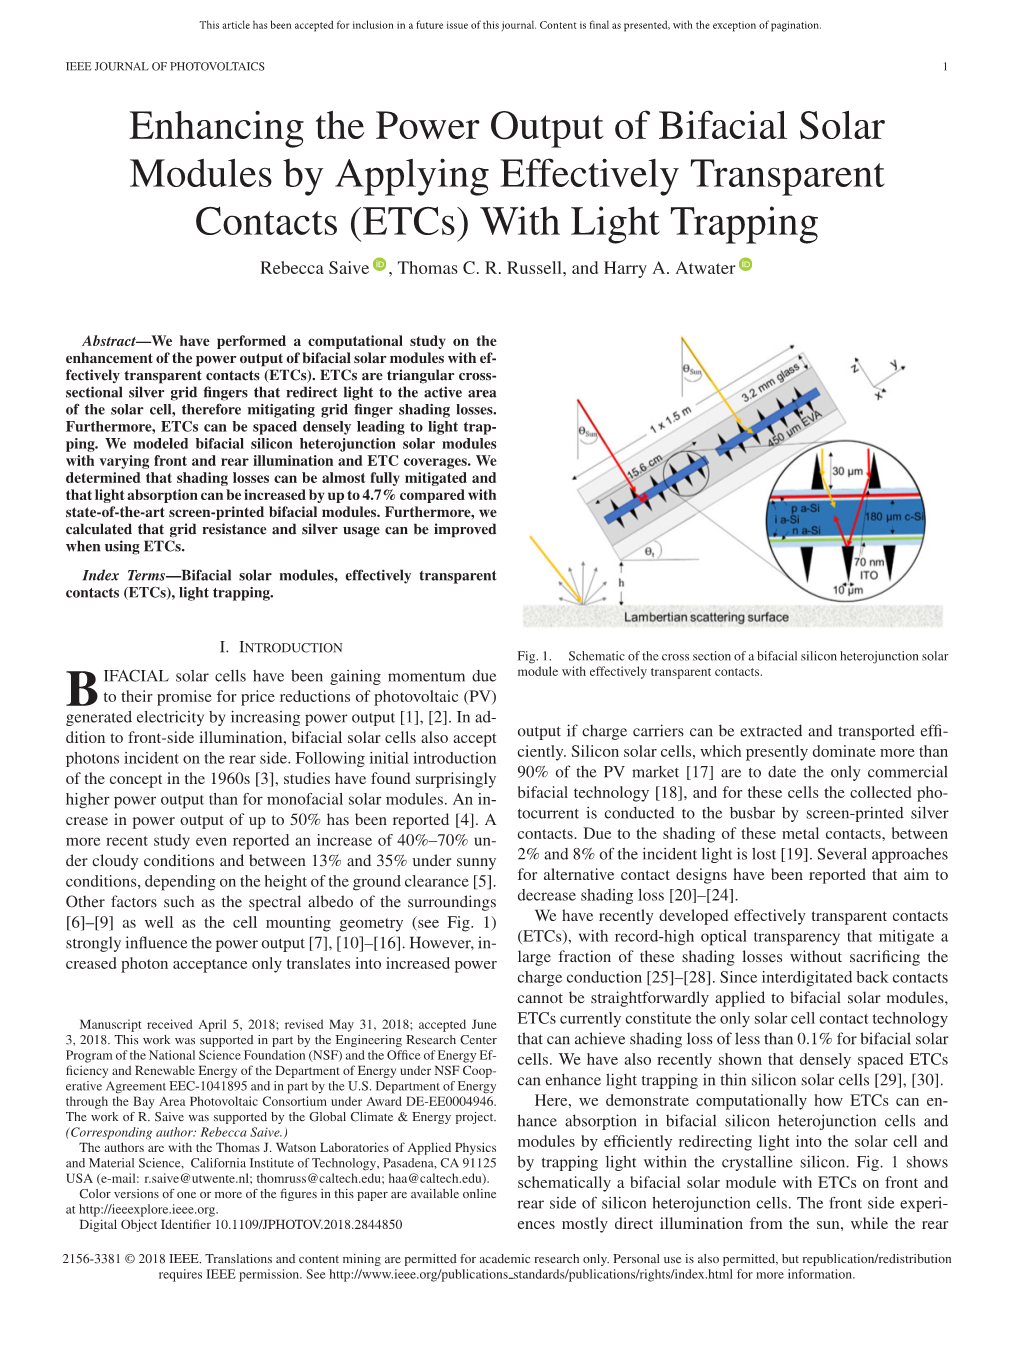 Enhancing the Power Output of Bifacial Solar Modules by Applying Effectively Transparent Contacts (Etcs) with Light Trapping Rebecca Saive , Thomas C